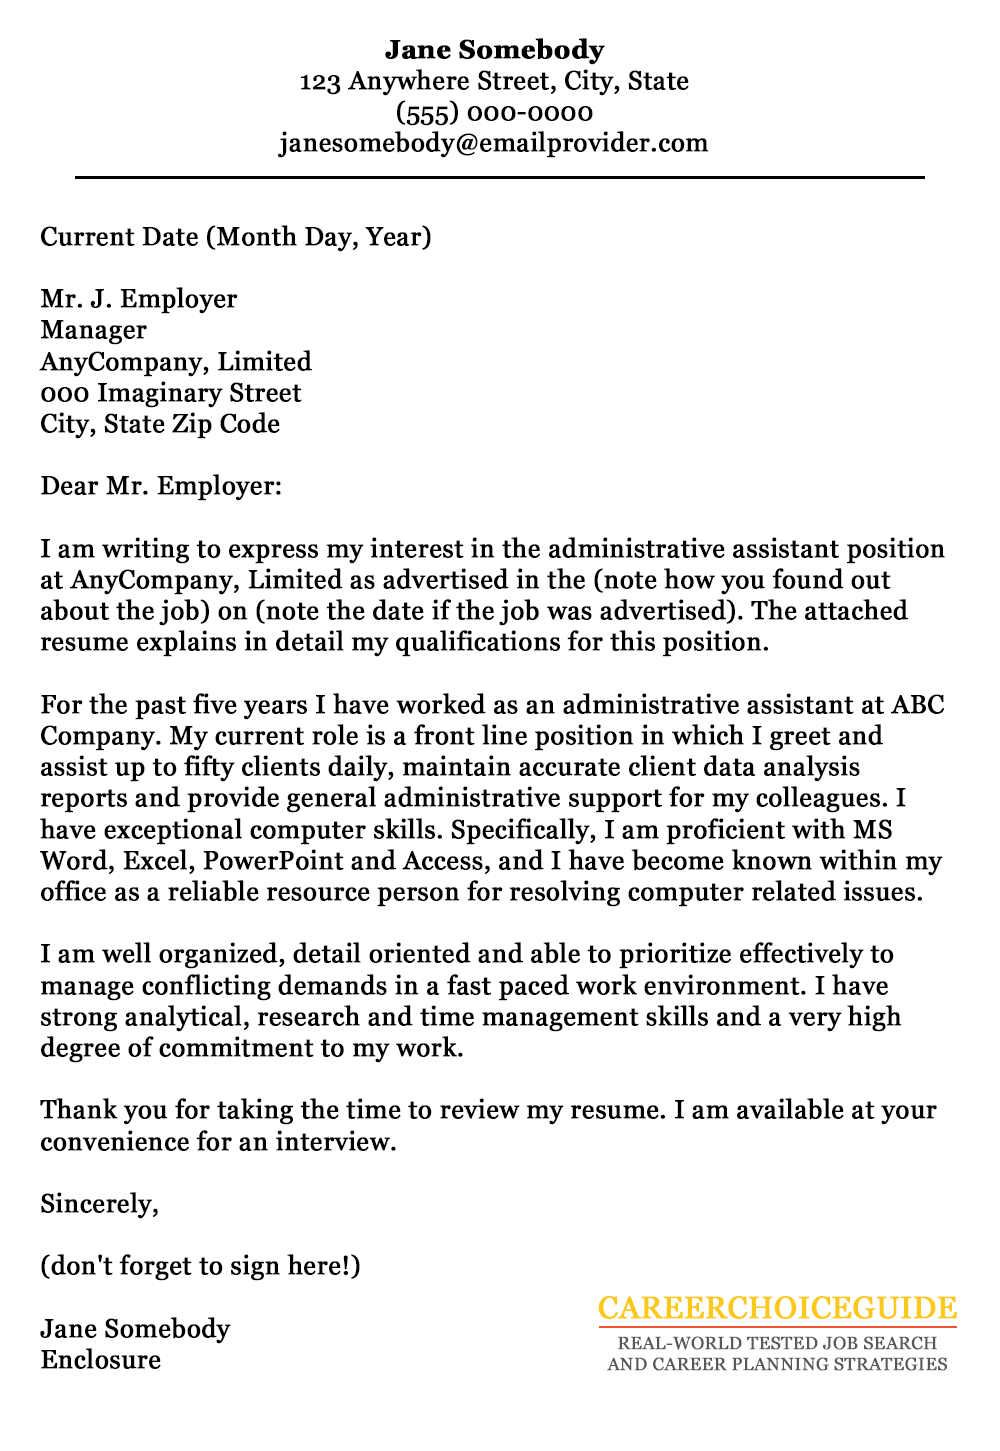 cover letter to impress employer